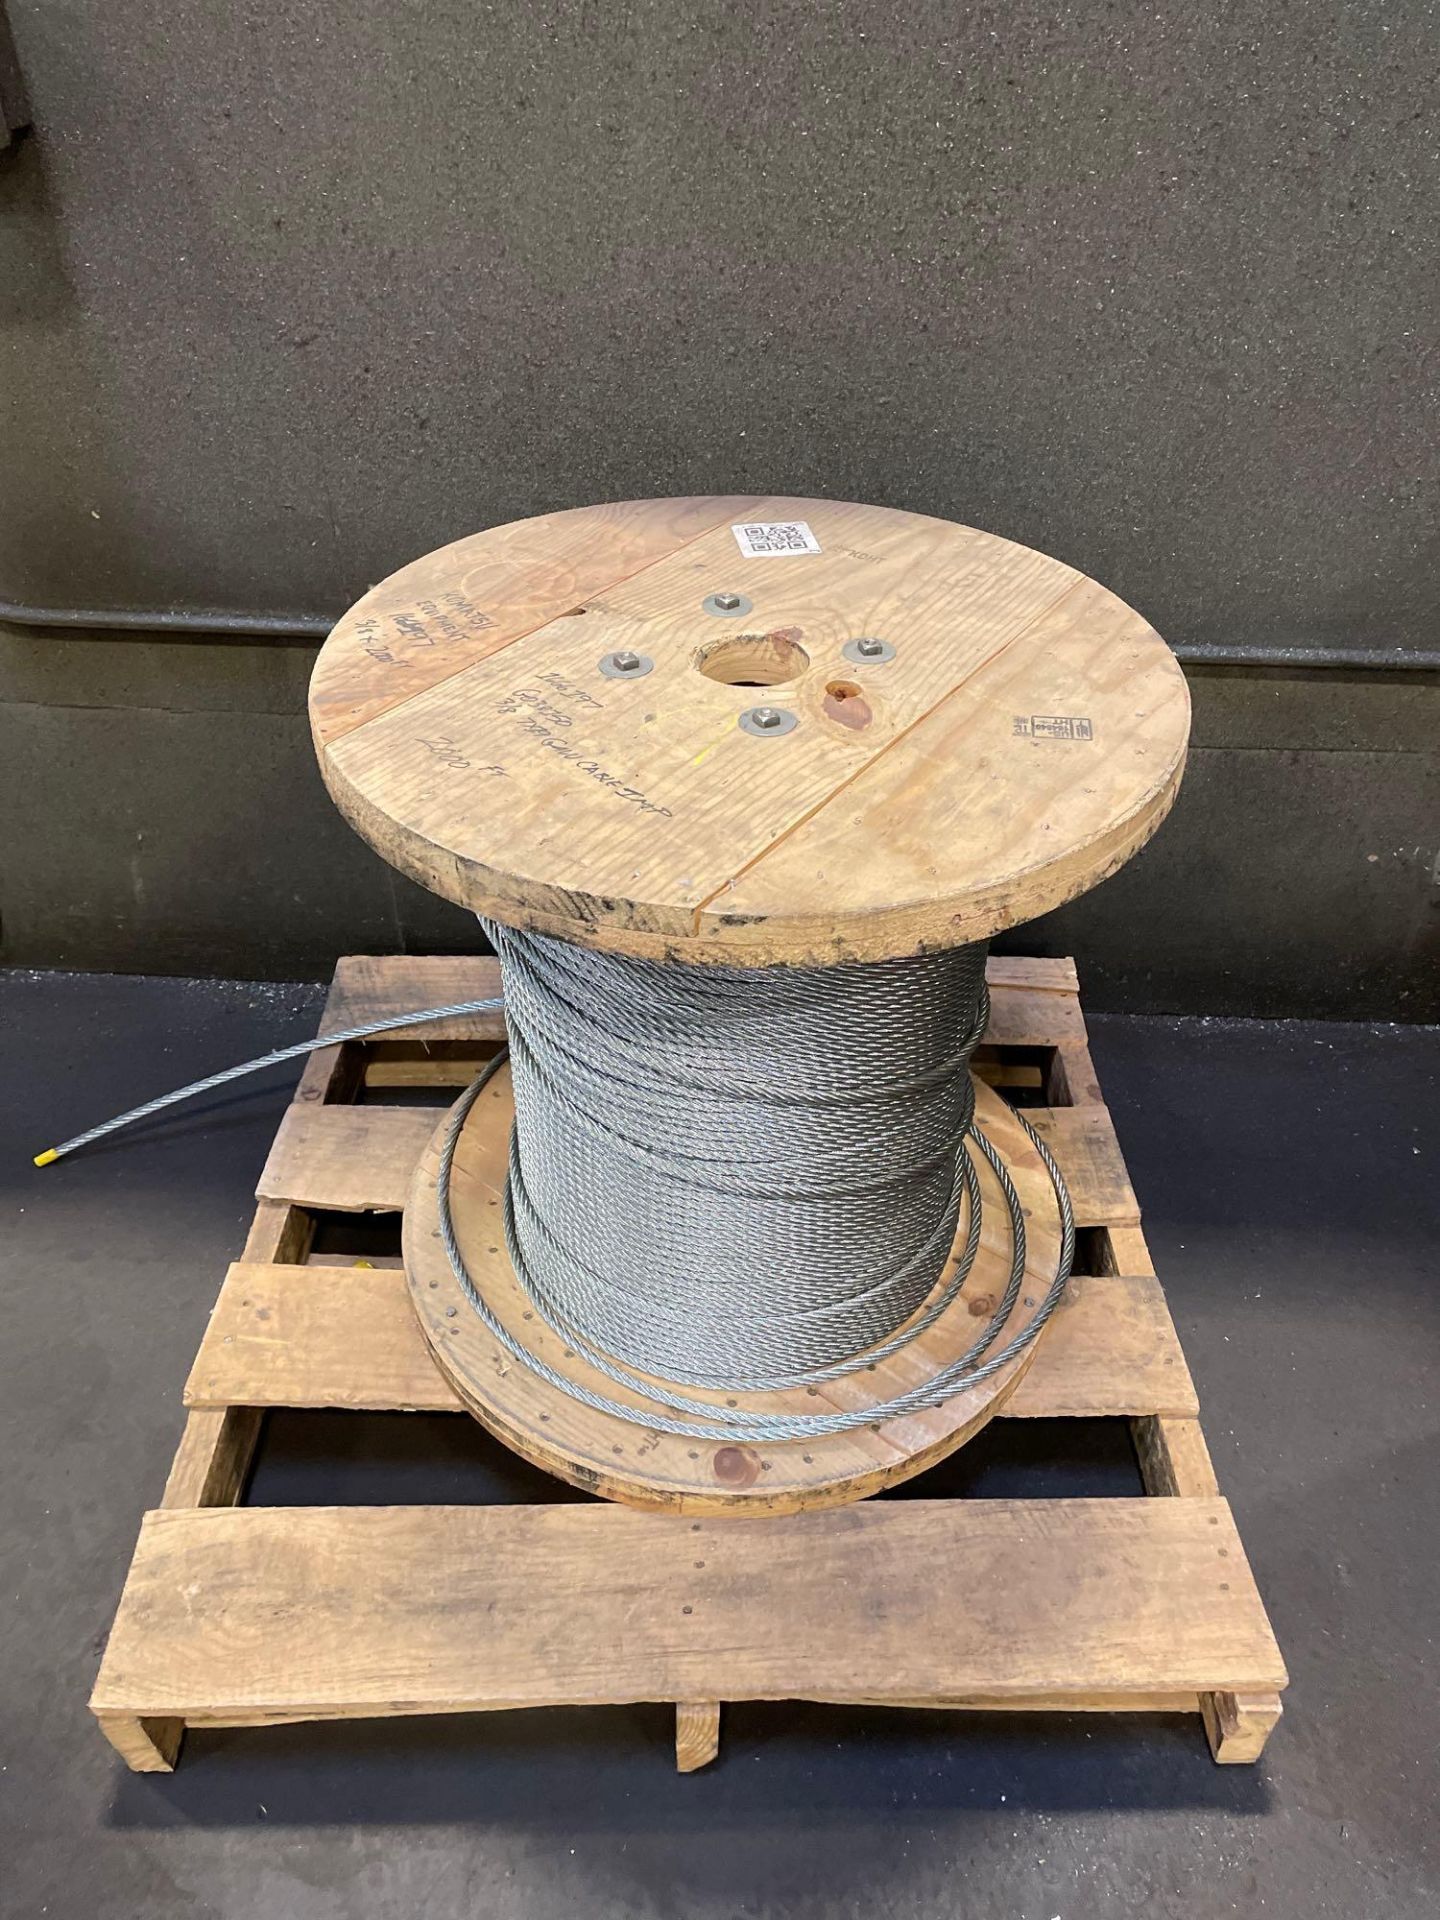 Spool of 3/8” Thick Cable